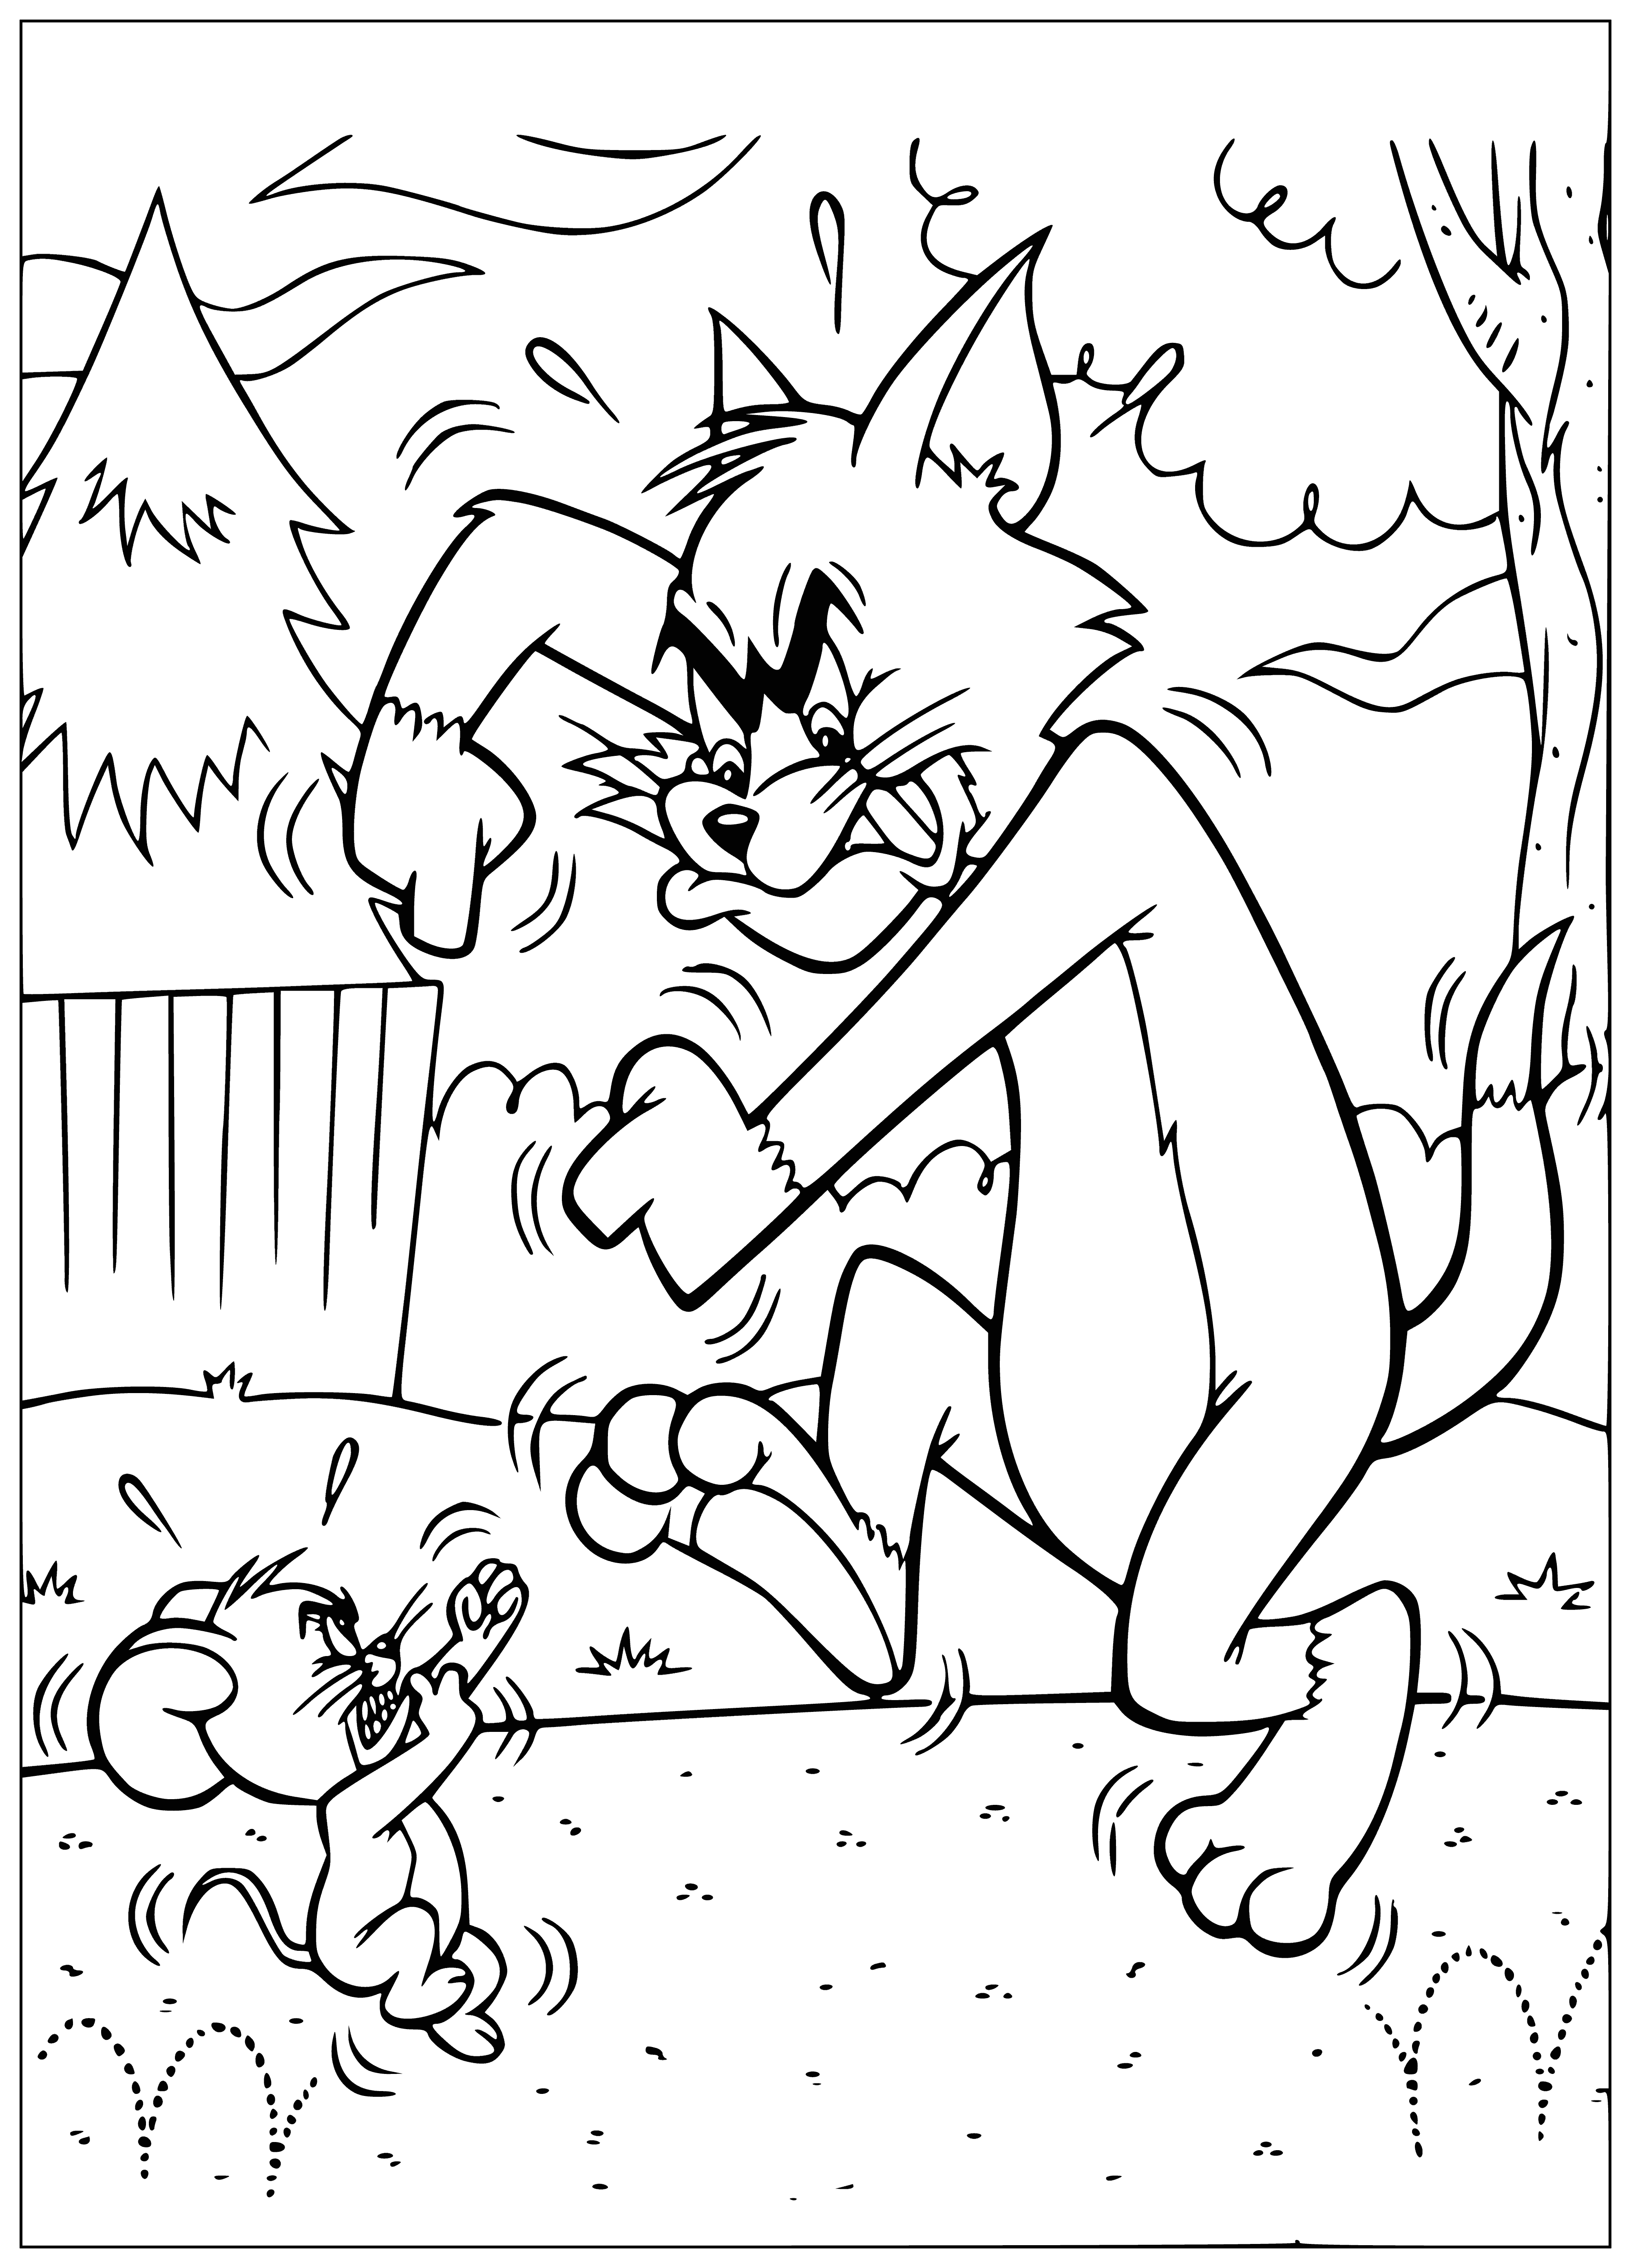 coloring page: Tom, a gray cat with white paws, is chasing a brown mouse named Jerry, who is attempting to evade him.